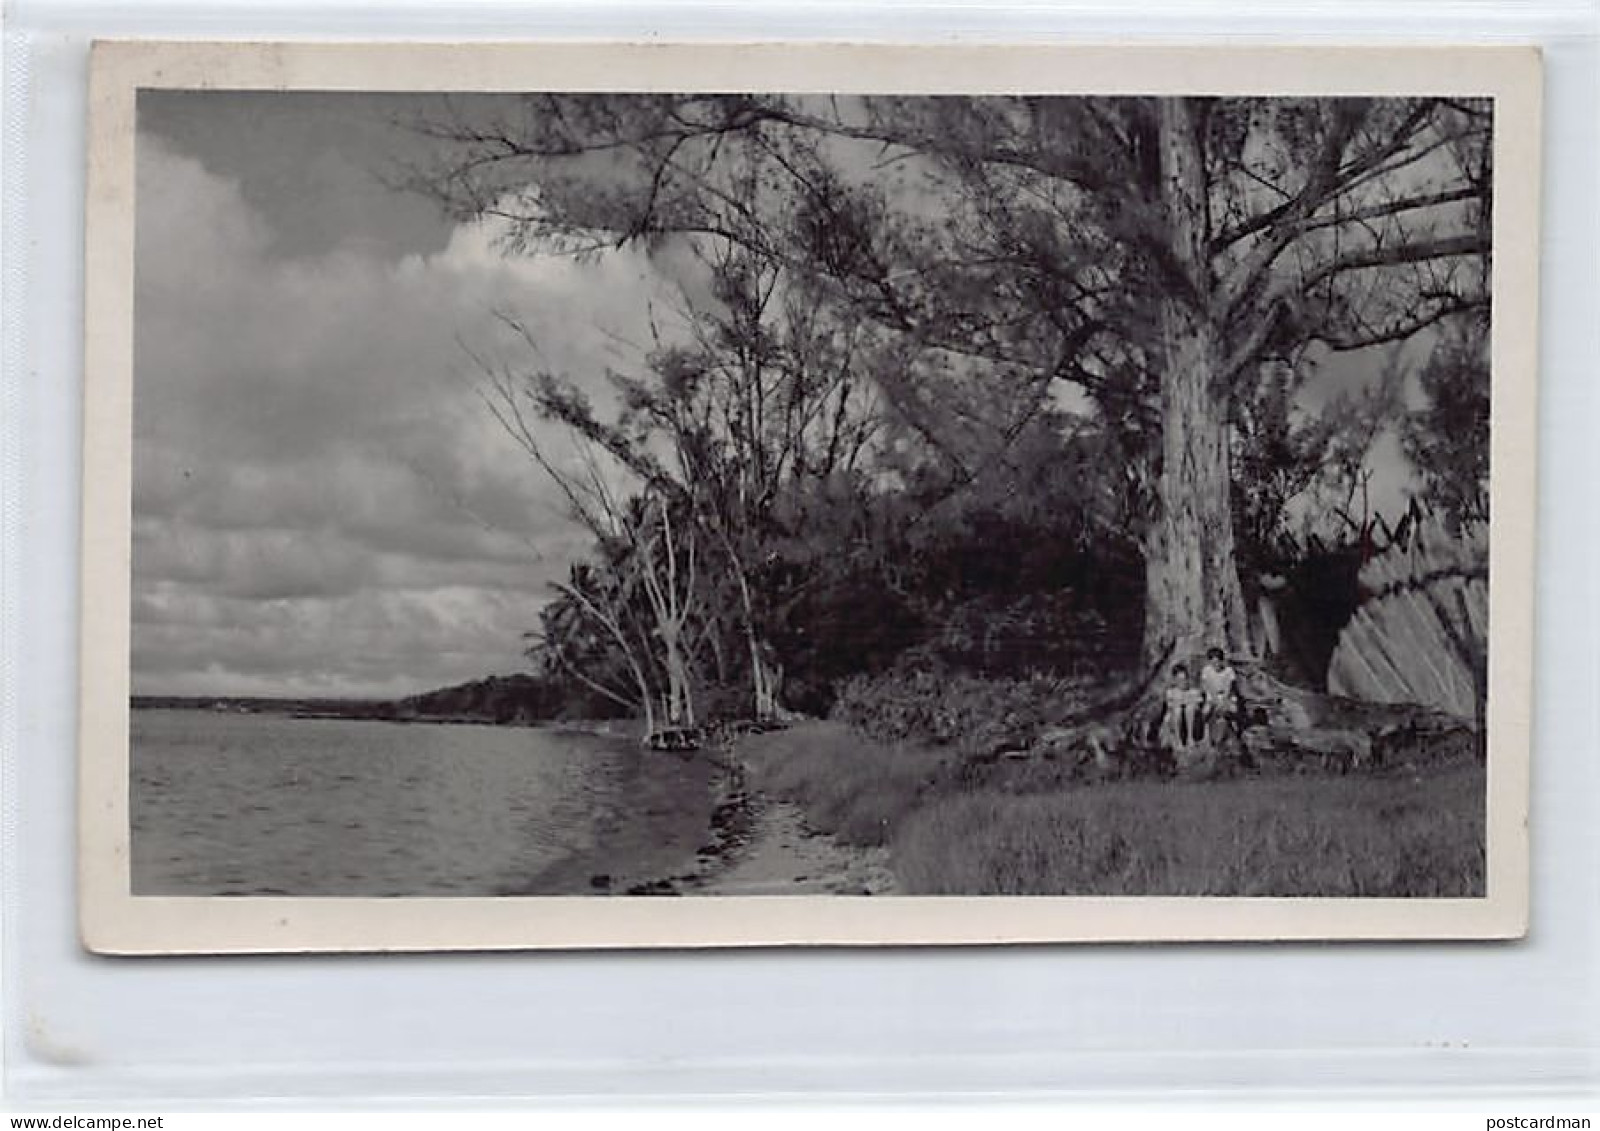 Mauritius - Group Of Trees - PHOTOGRAPH Postcard Size - Publ. Unknown  - Maurice